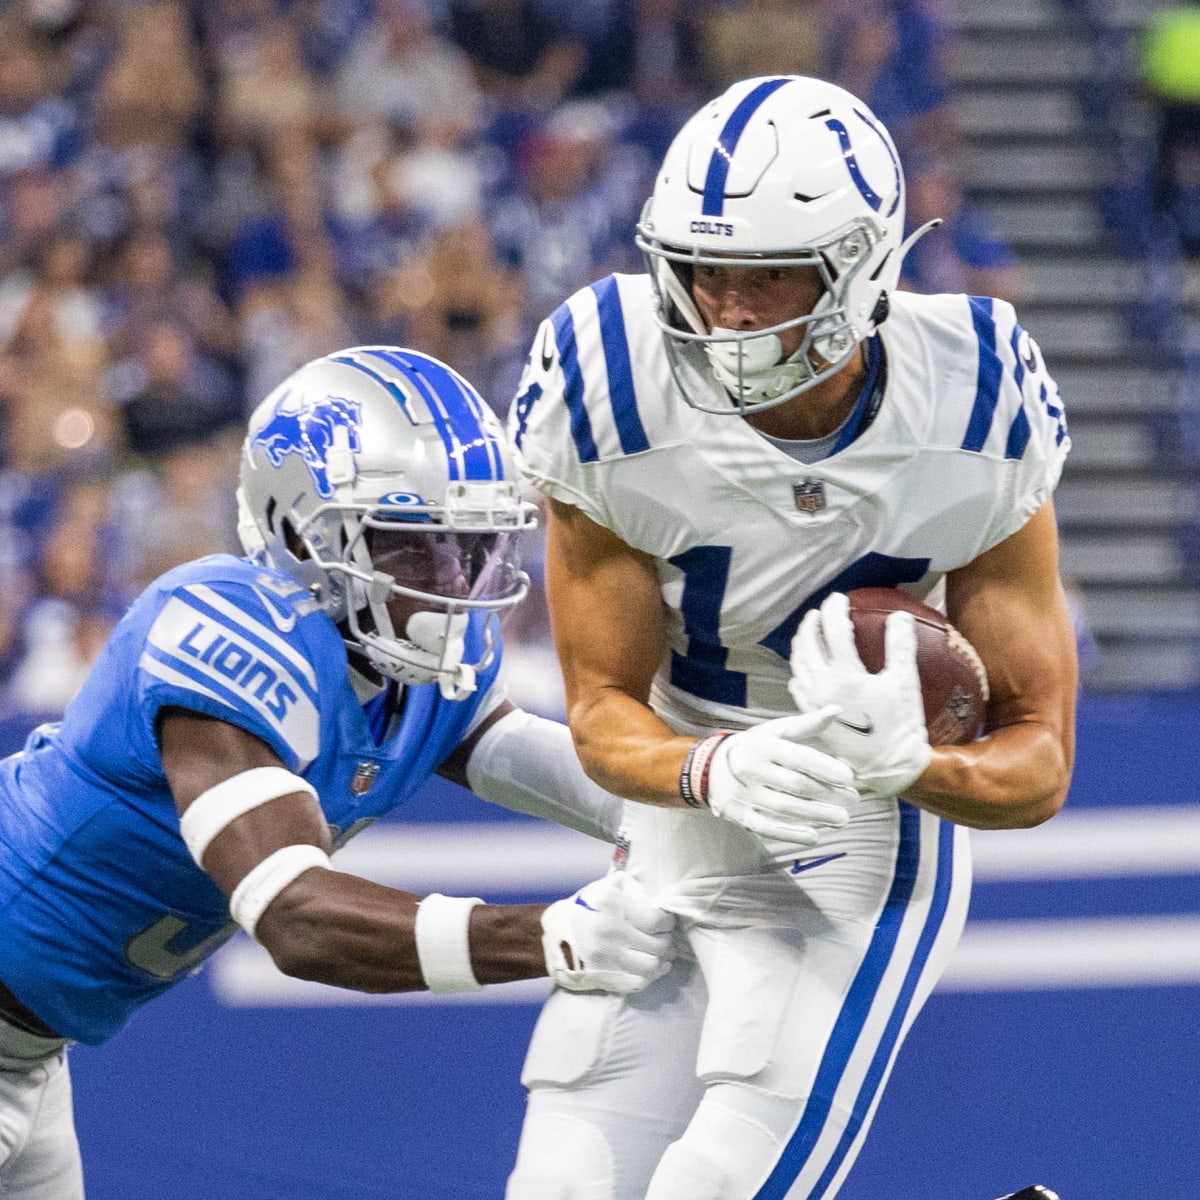 Film Room: Alec Pierce Appears Primed and Ready for Regular Season